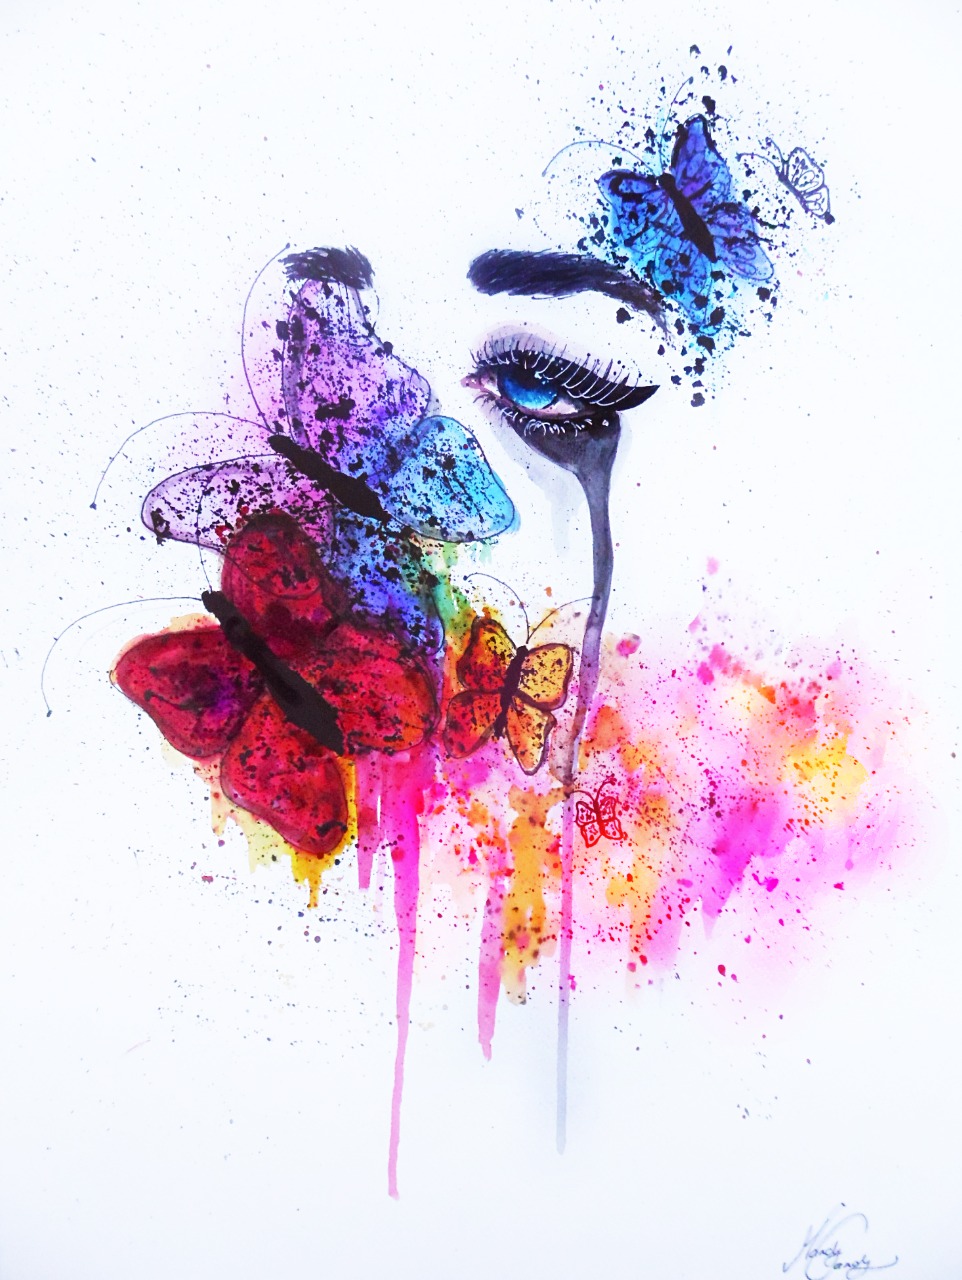 16-Andrea-Wéber-aka-Mandy-Candy-Paintings-A-Mirror-to-the-Artist-s-Emotions-www-designstack-co